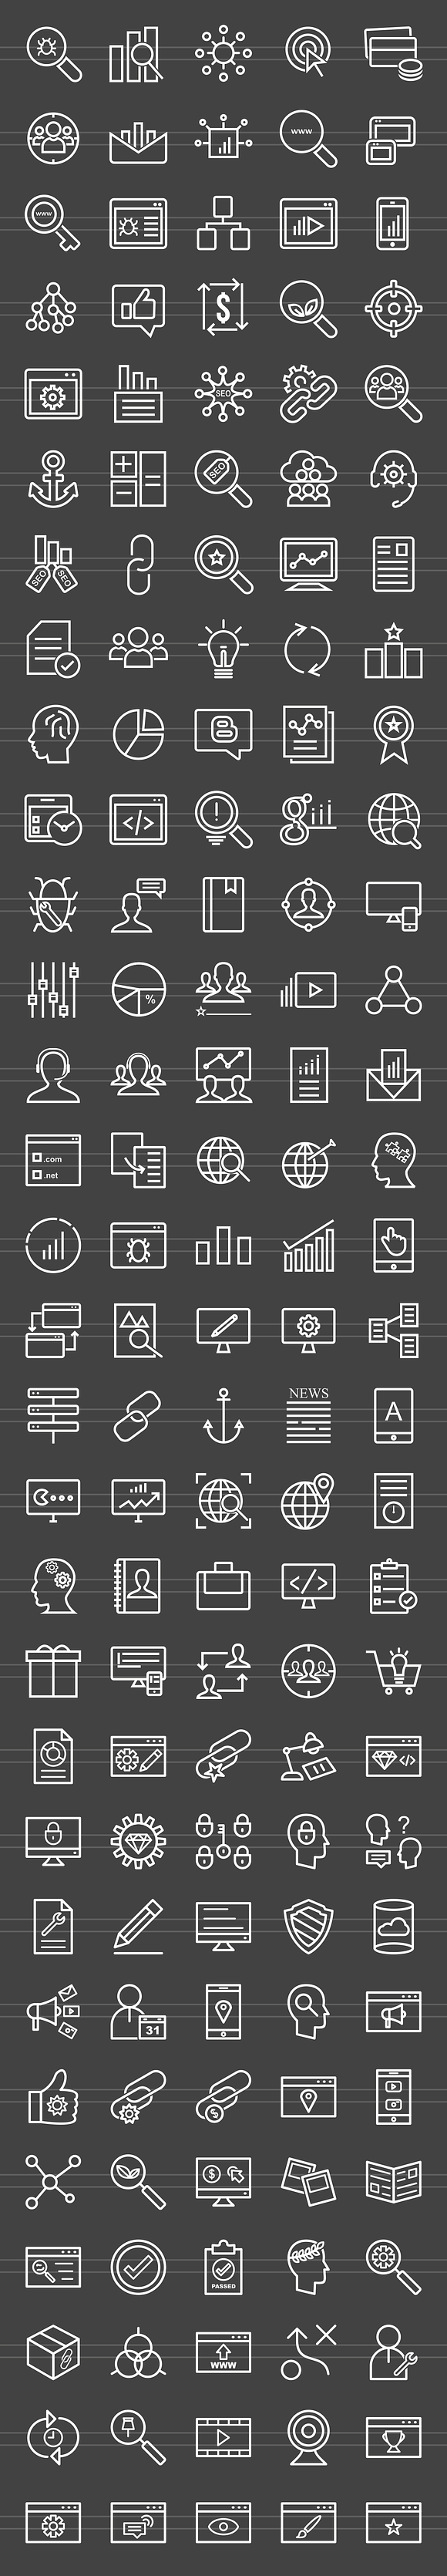 150 IT Services Line Inverted Icons in Graphics - product preview 1